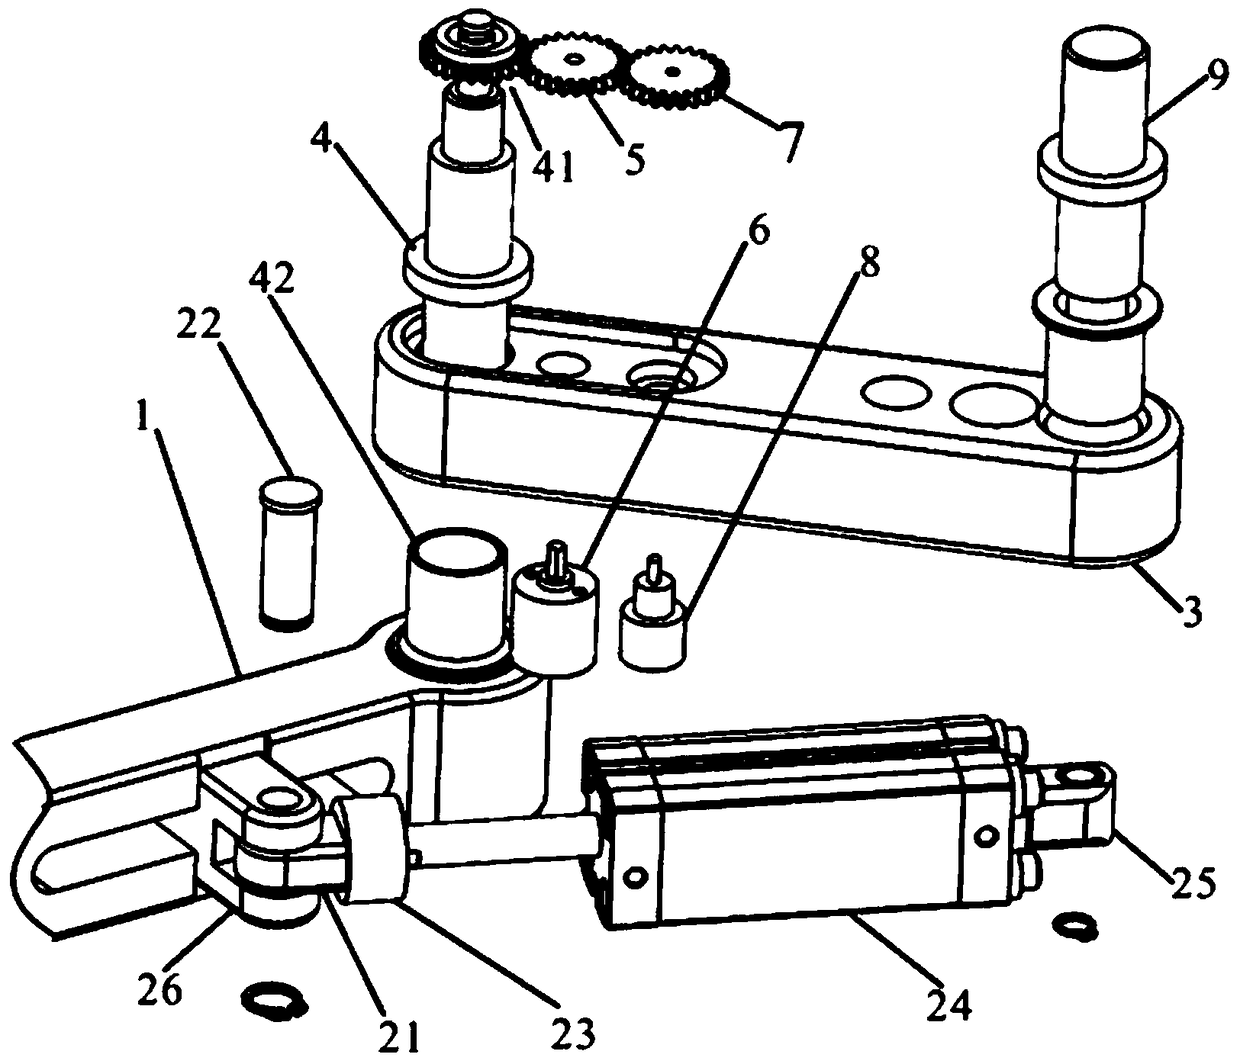 Cylinder-driven robot joint device